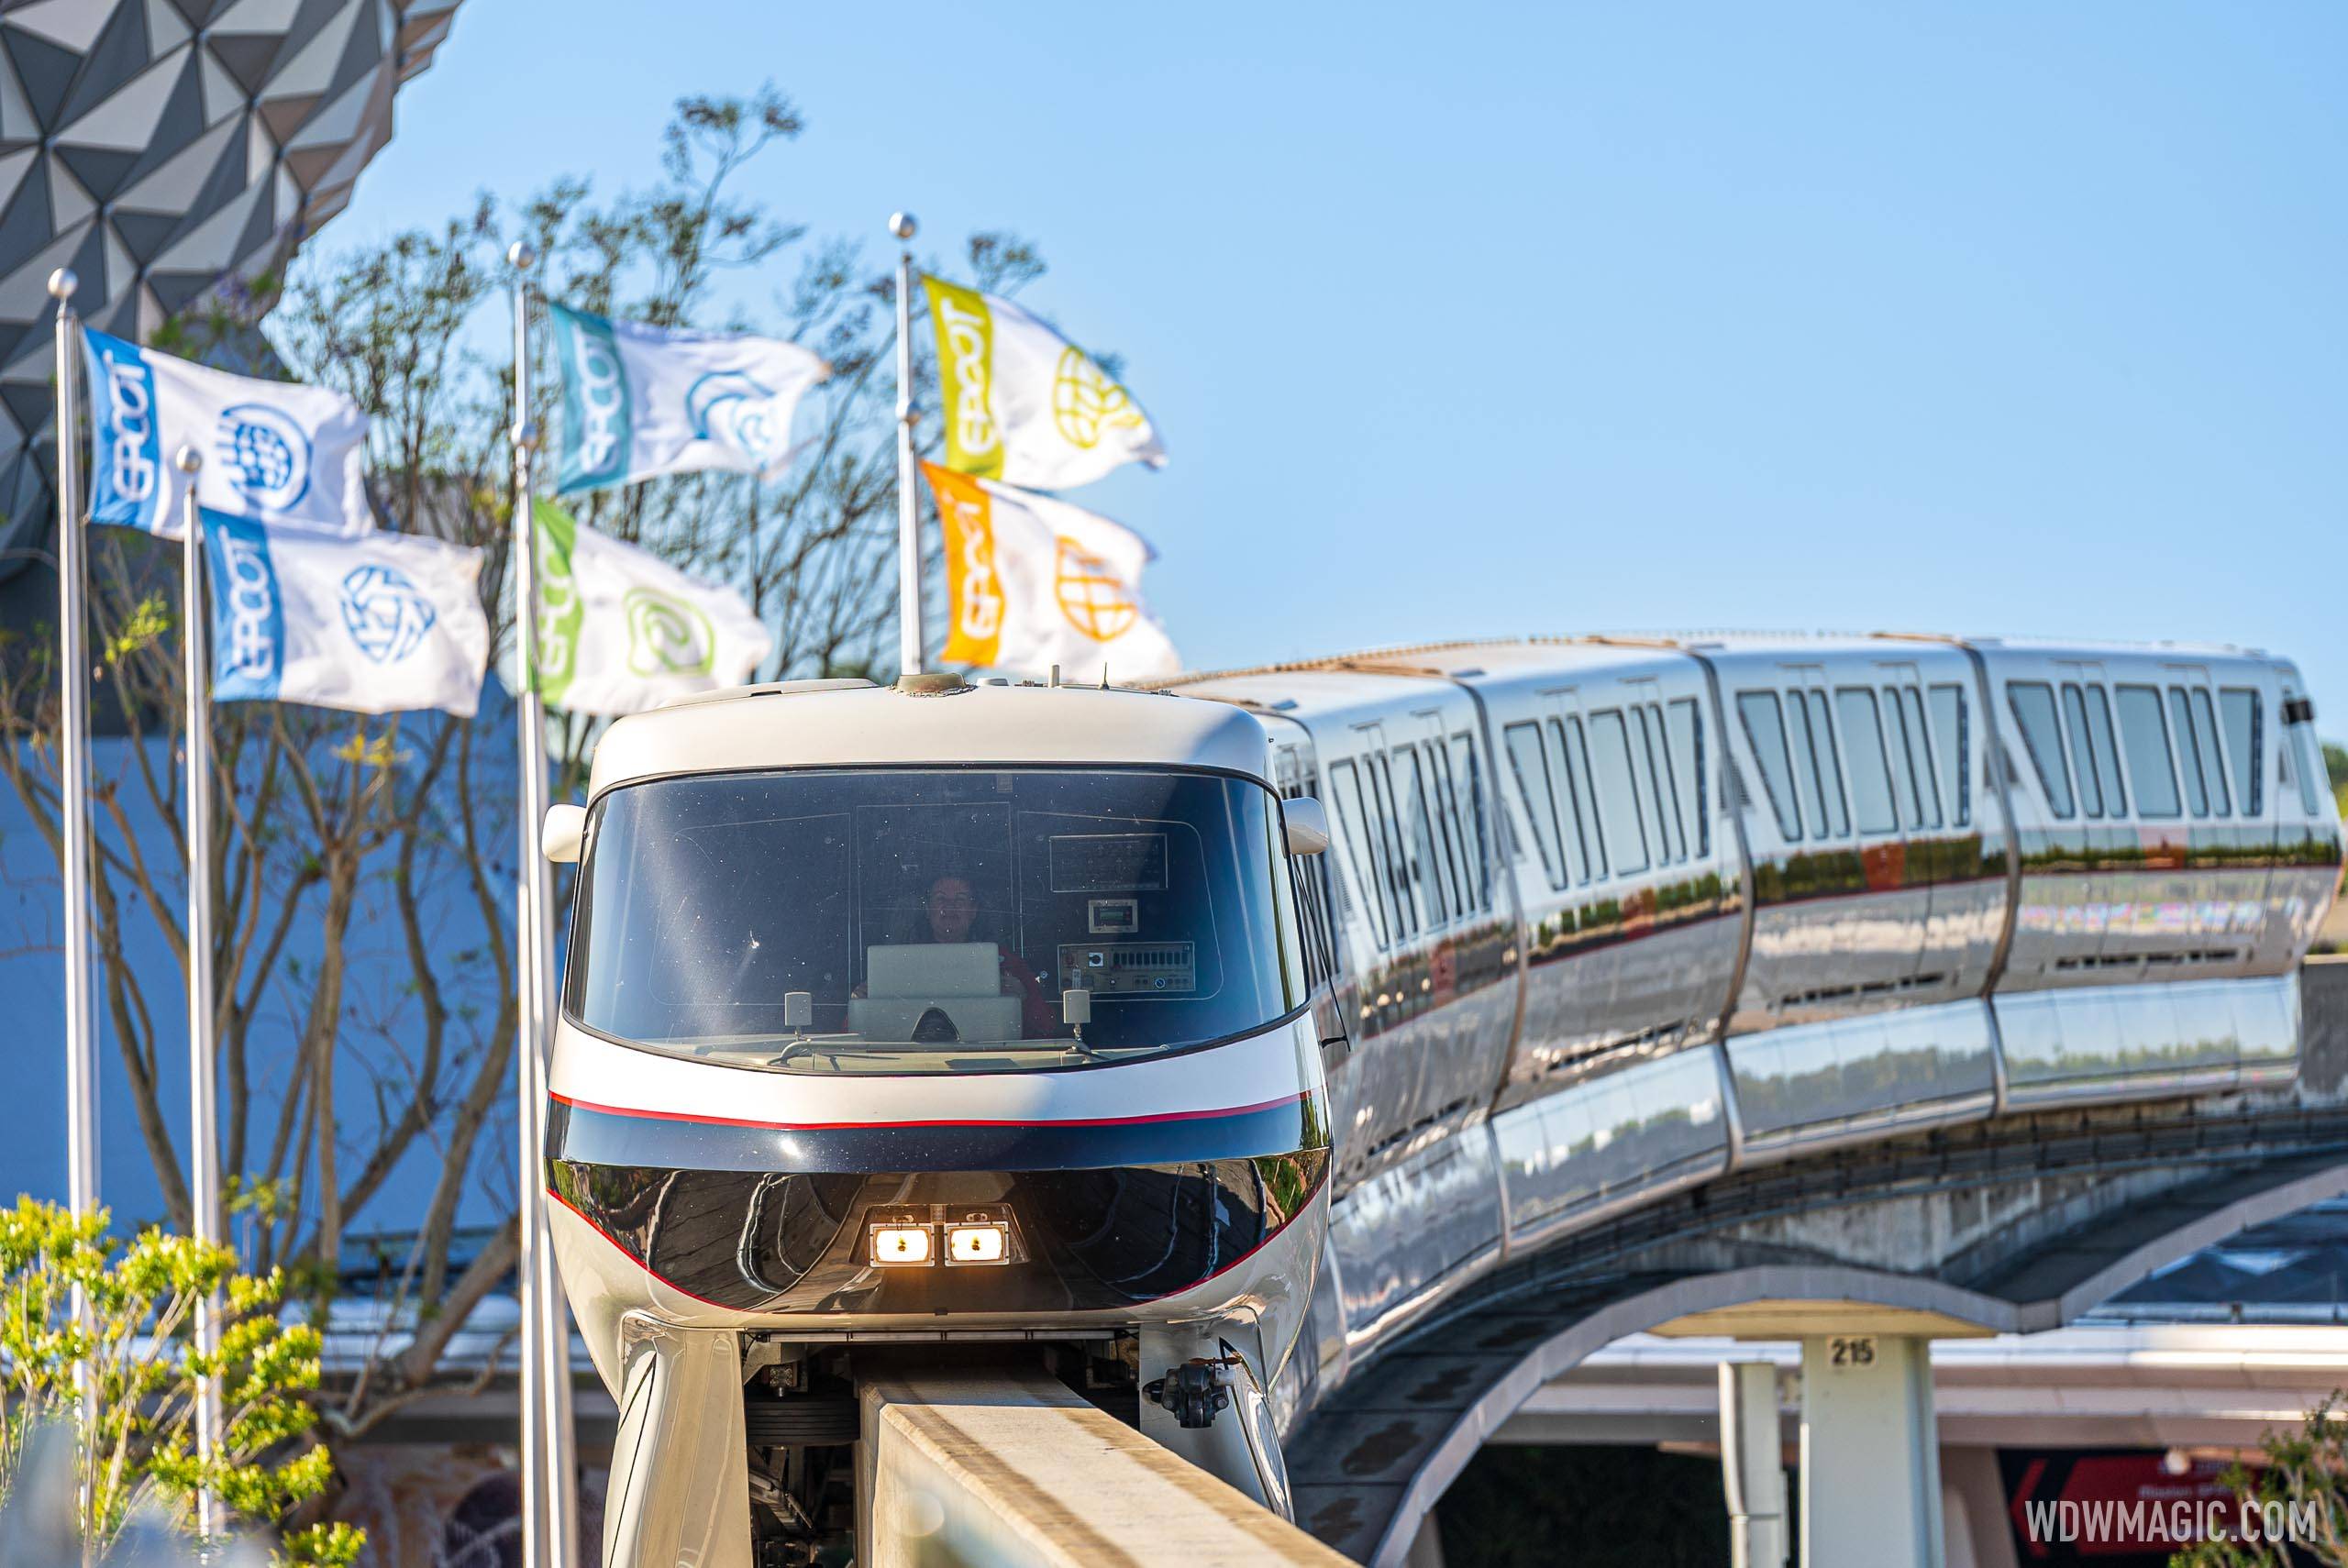 Modified Monorail routes in effect during late May